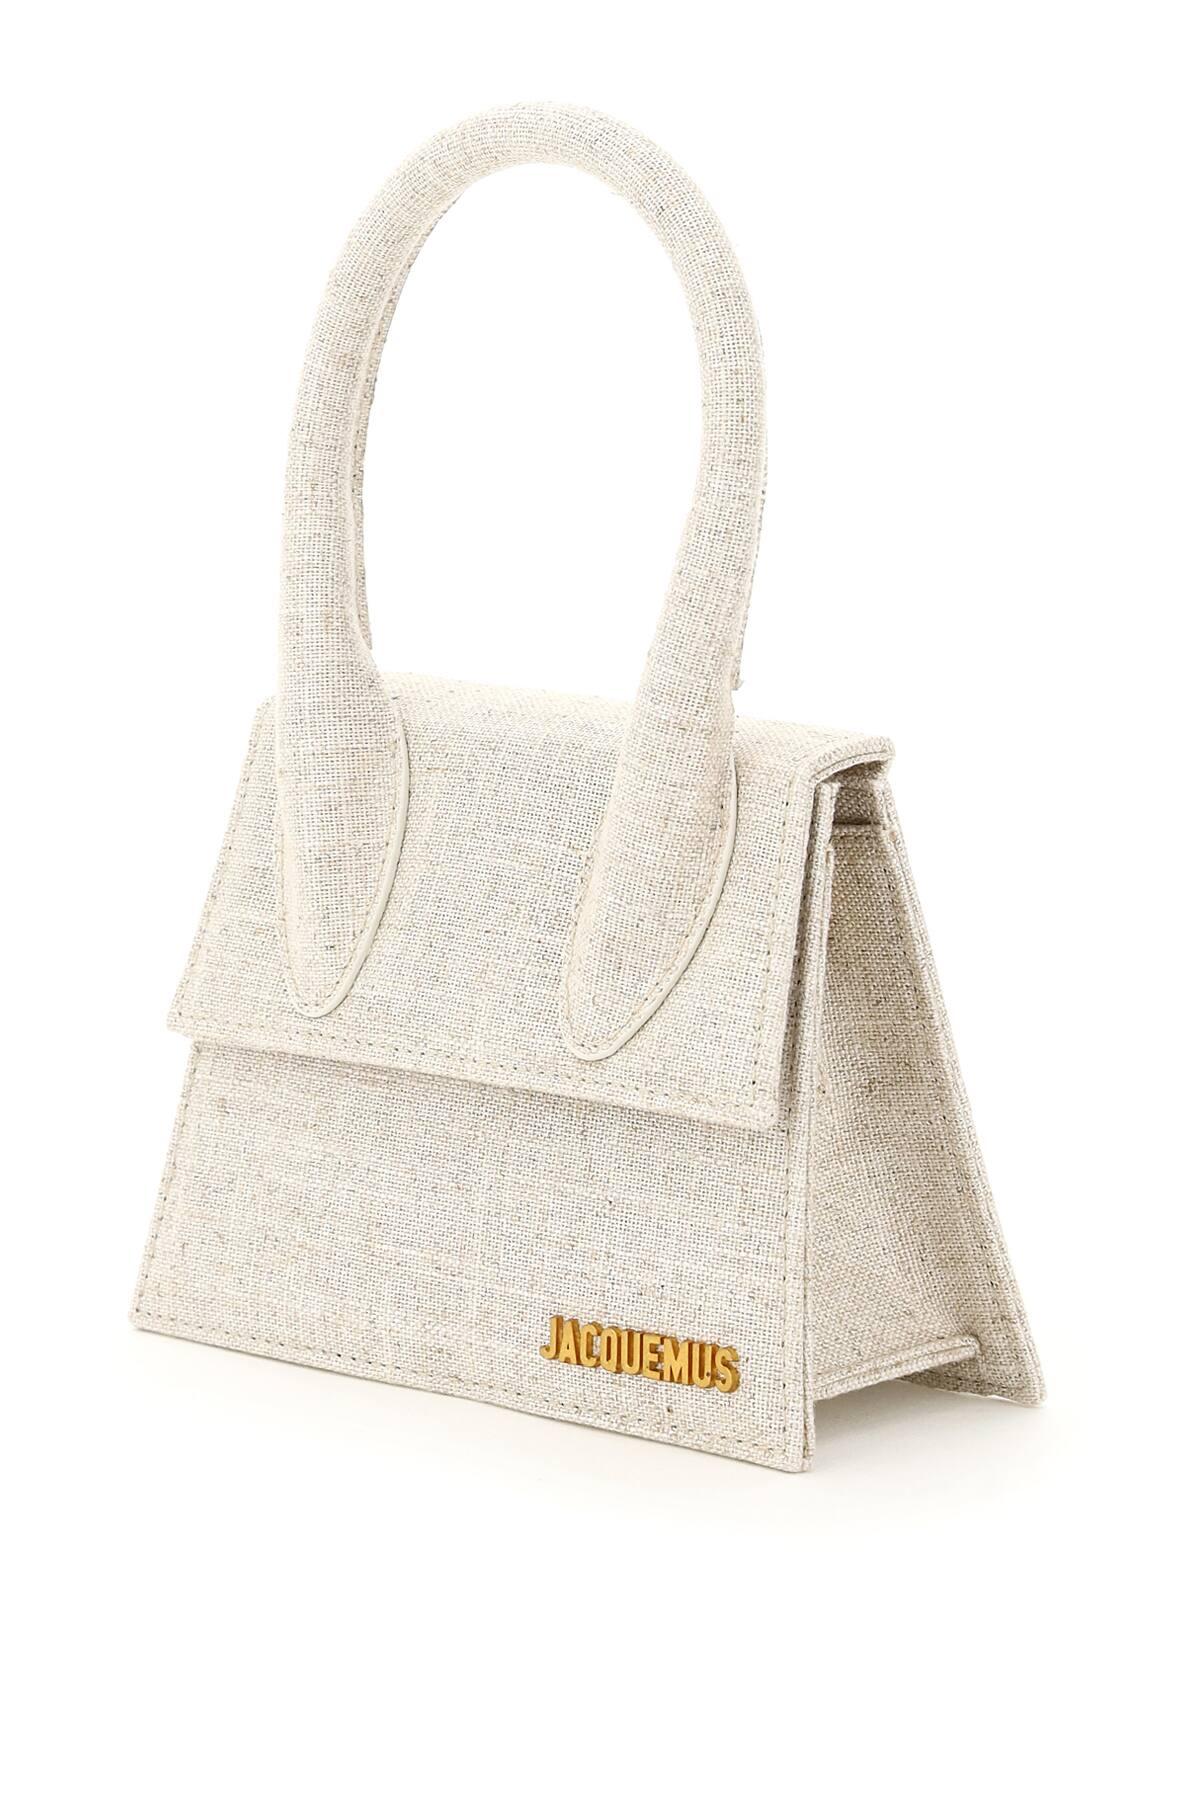 Jacquemus Le Chiquito Moyen Canvas Bag in Natural | Lyst